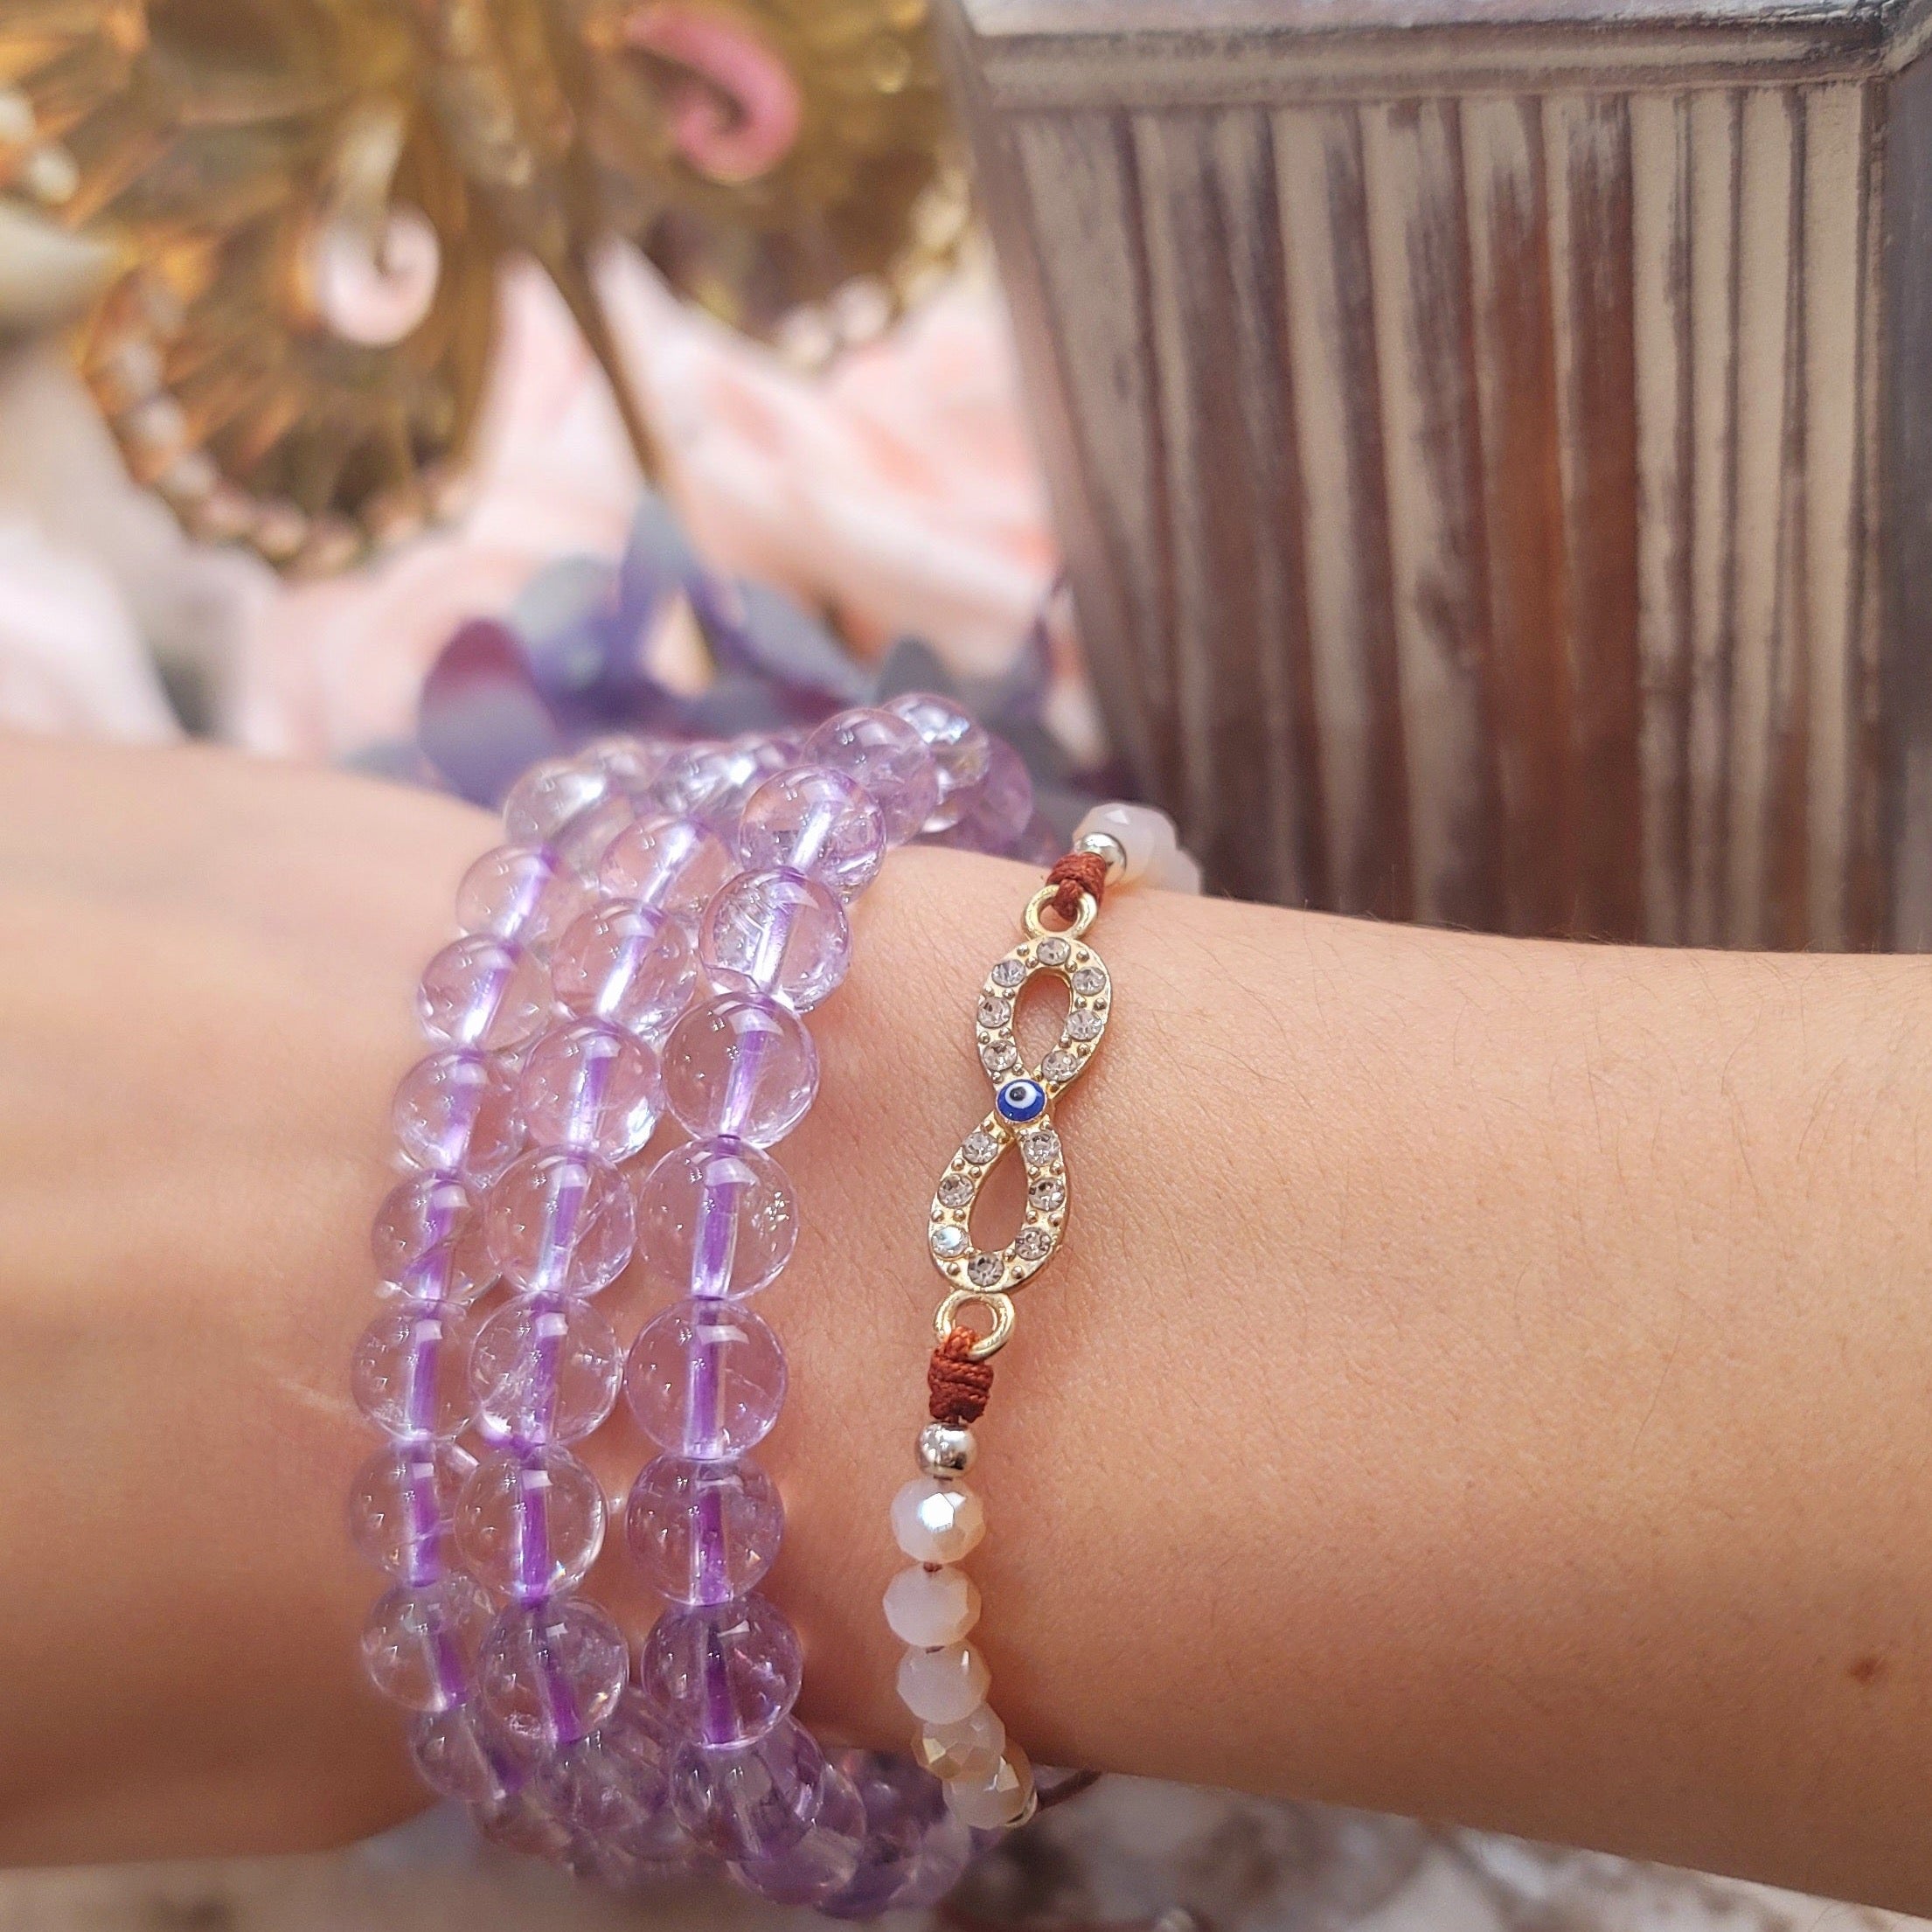 Amethyst Pastel Rainbow Bracelet for Intuition, Connection with the Divine and Sobriety